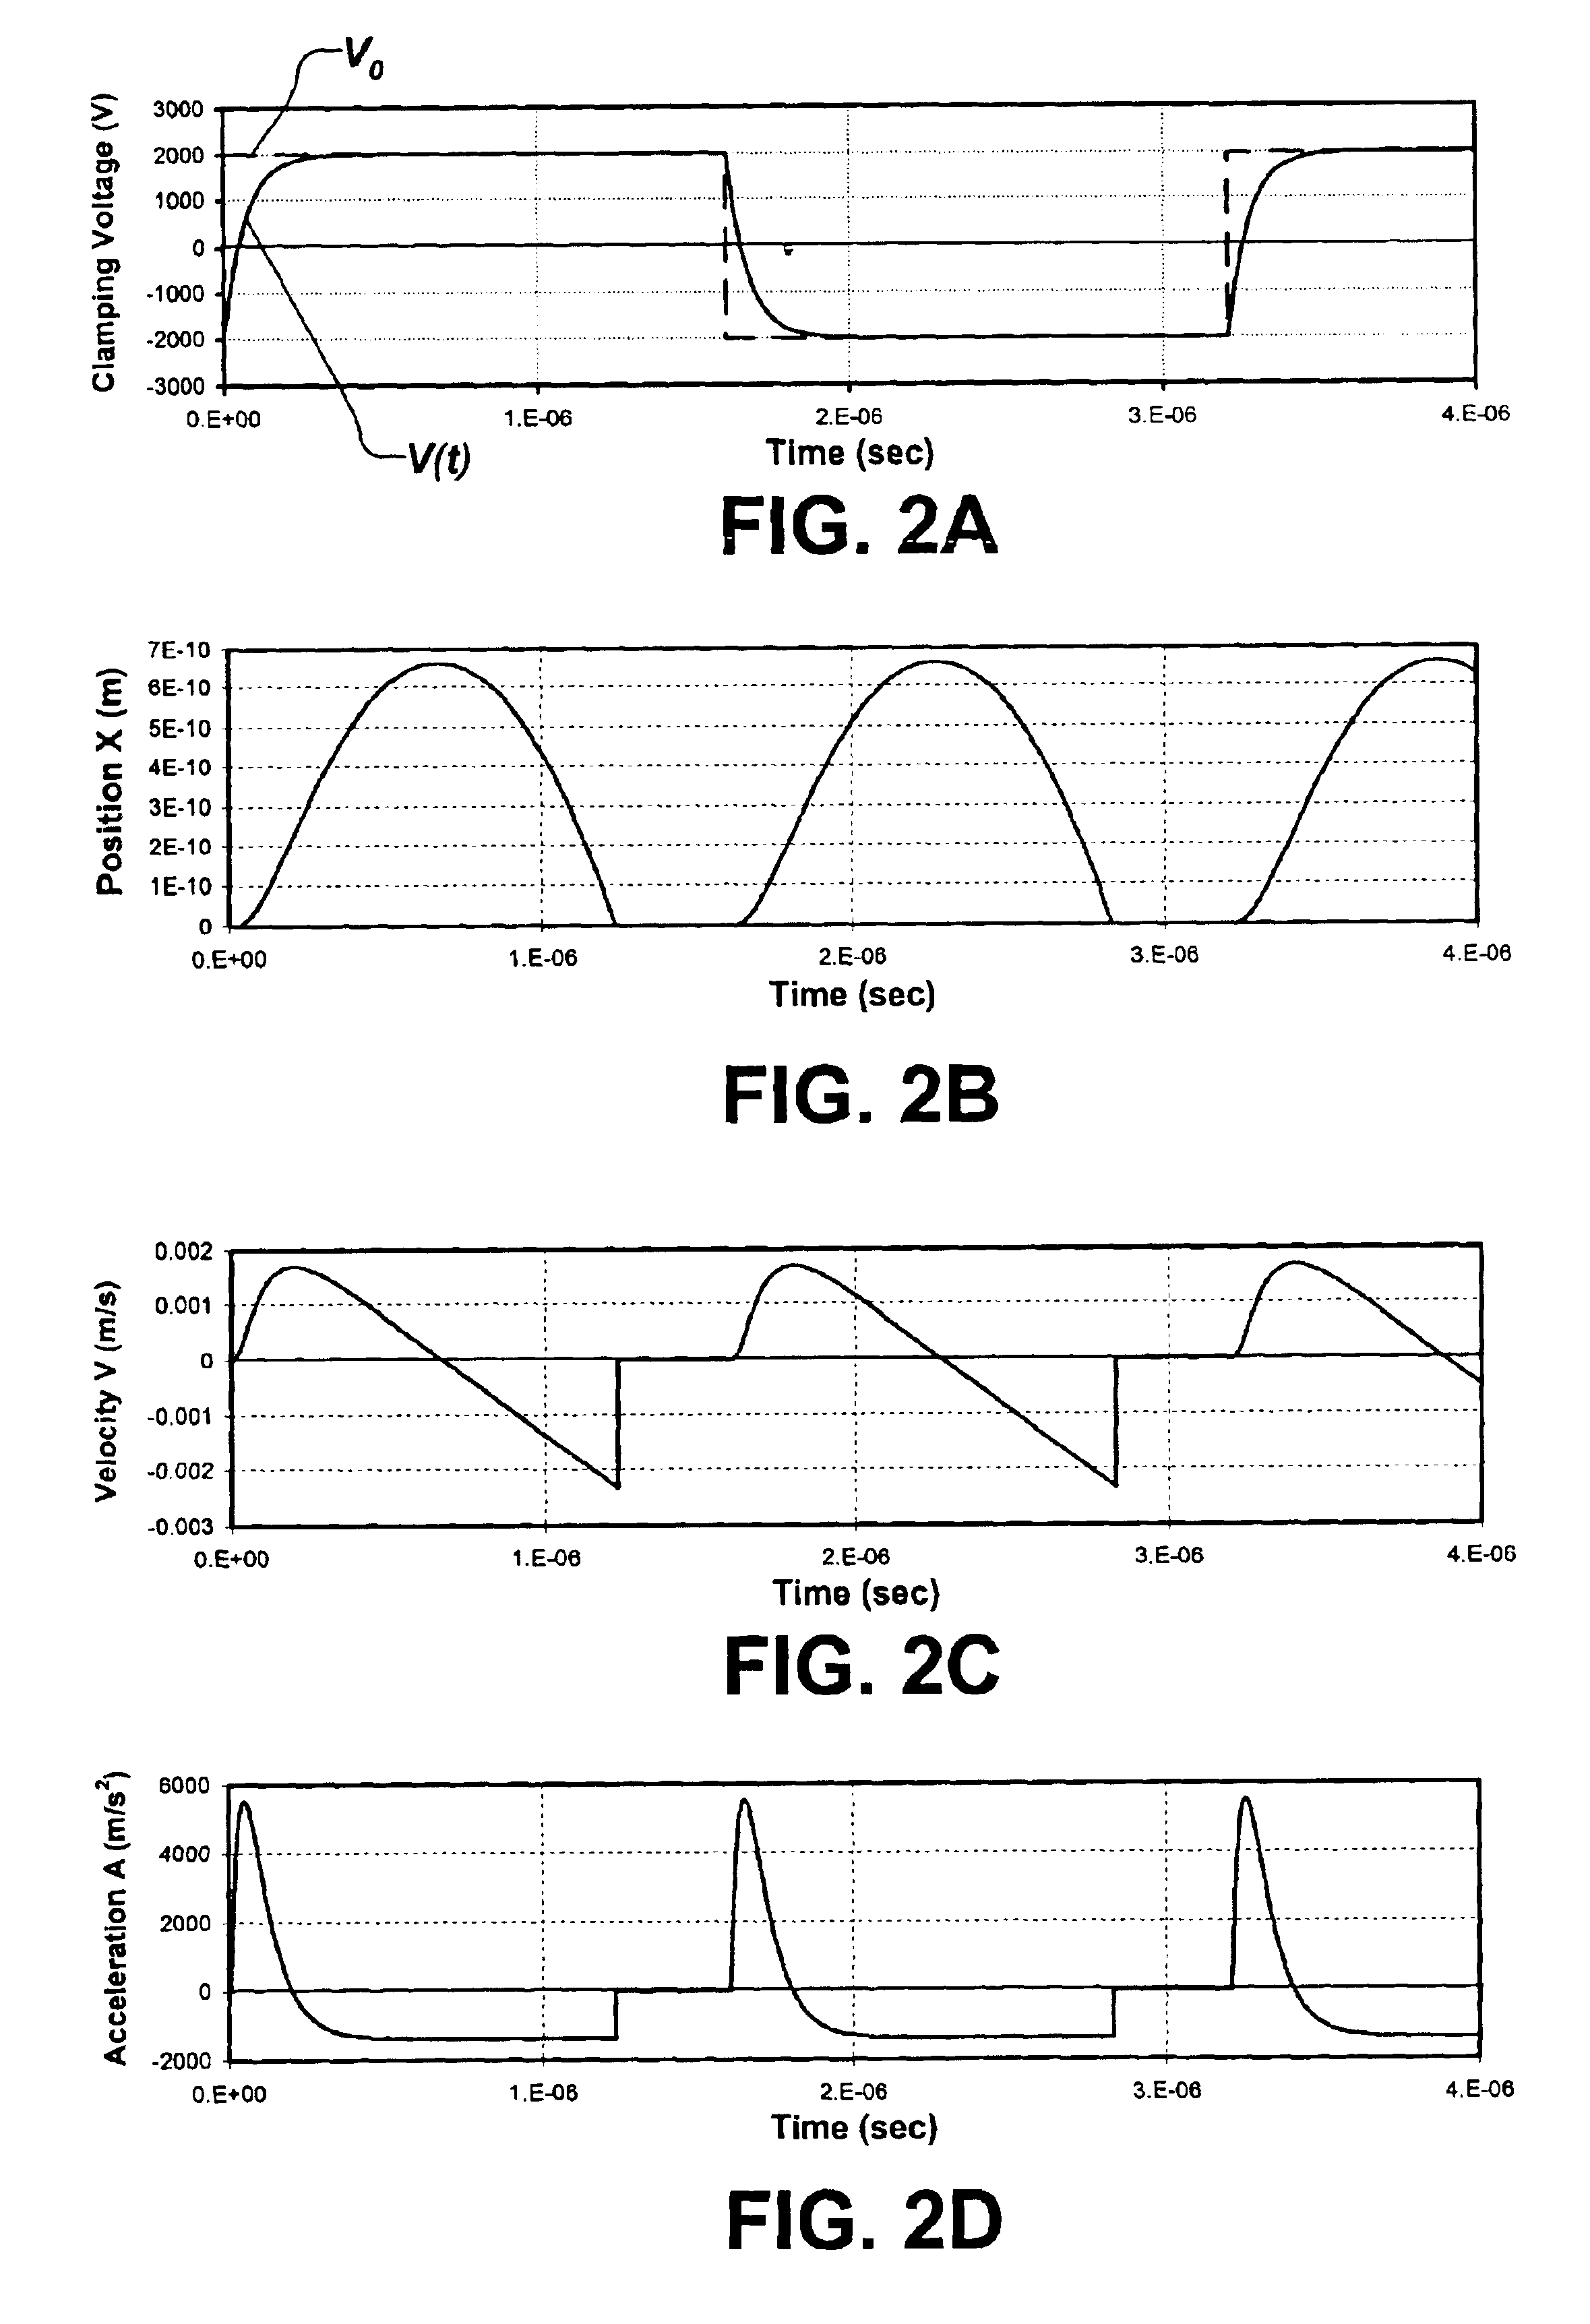 Clamping and de-clamping semiconductor wafers on an electrostatic chuck using wafer inertial confinement by applying a single-phase square wave AC clamping voltage